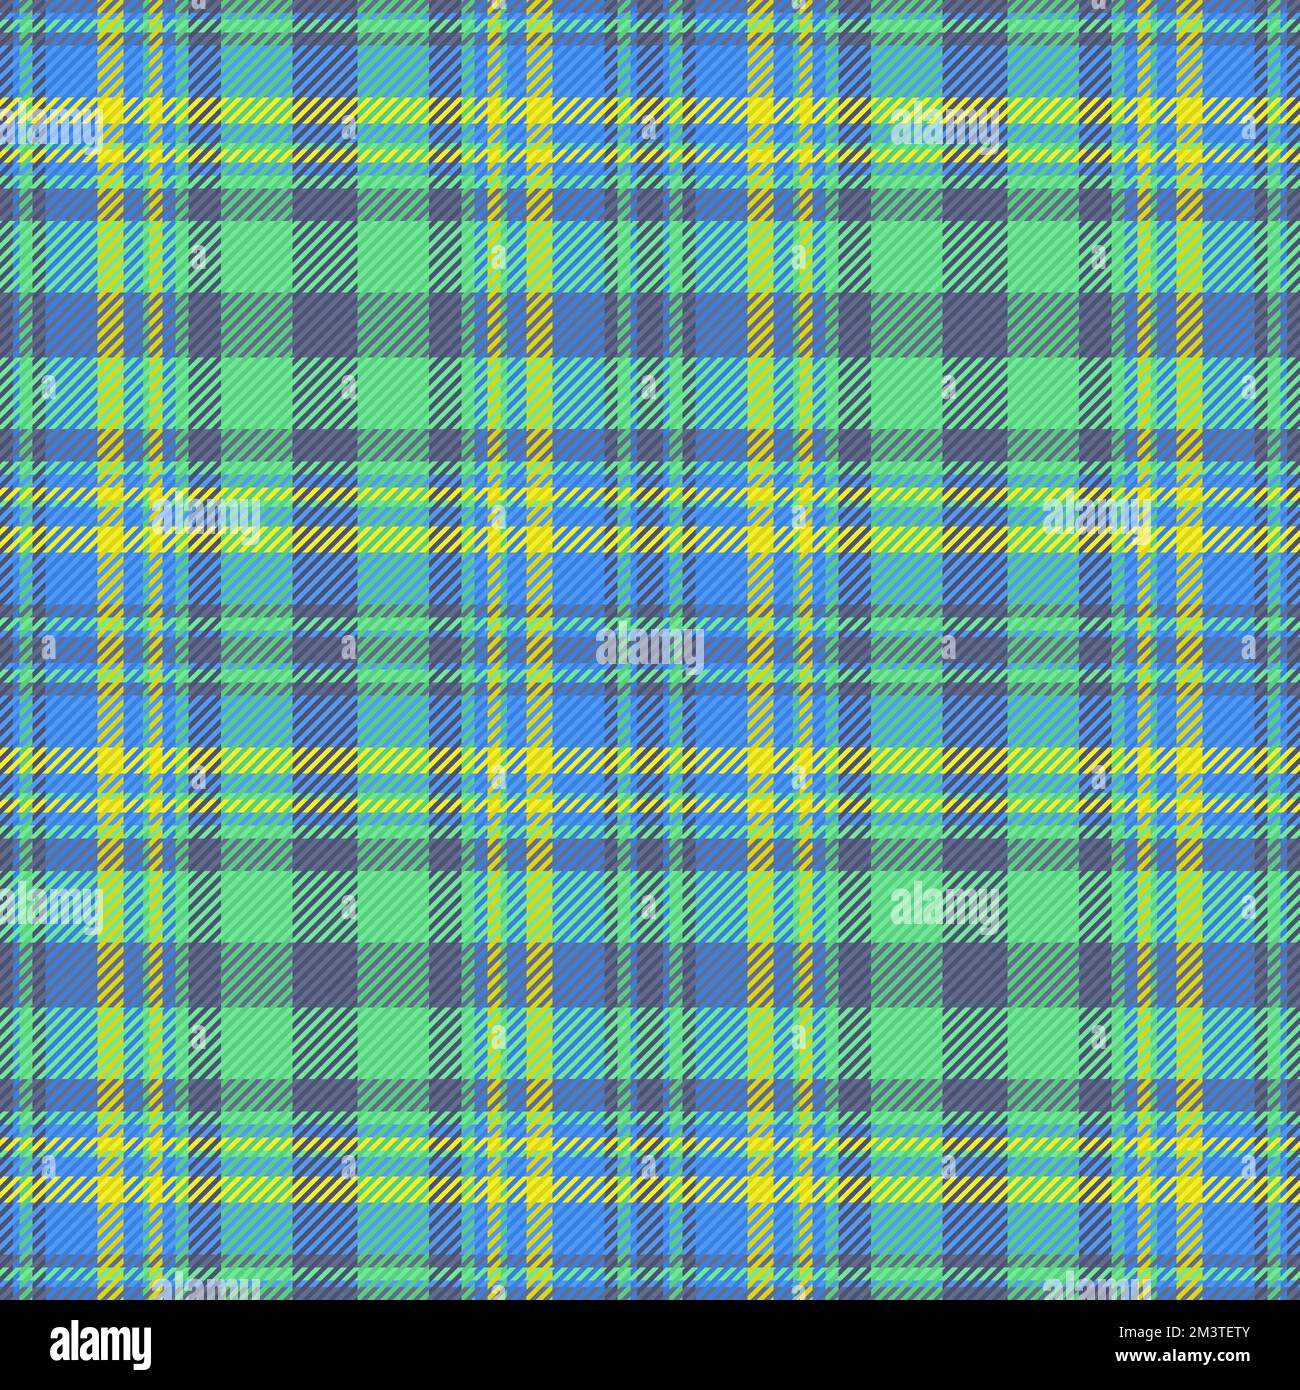 Fabric check vector. Seamless textile texture. Plaid background pattern ...